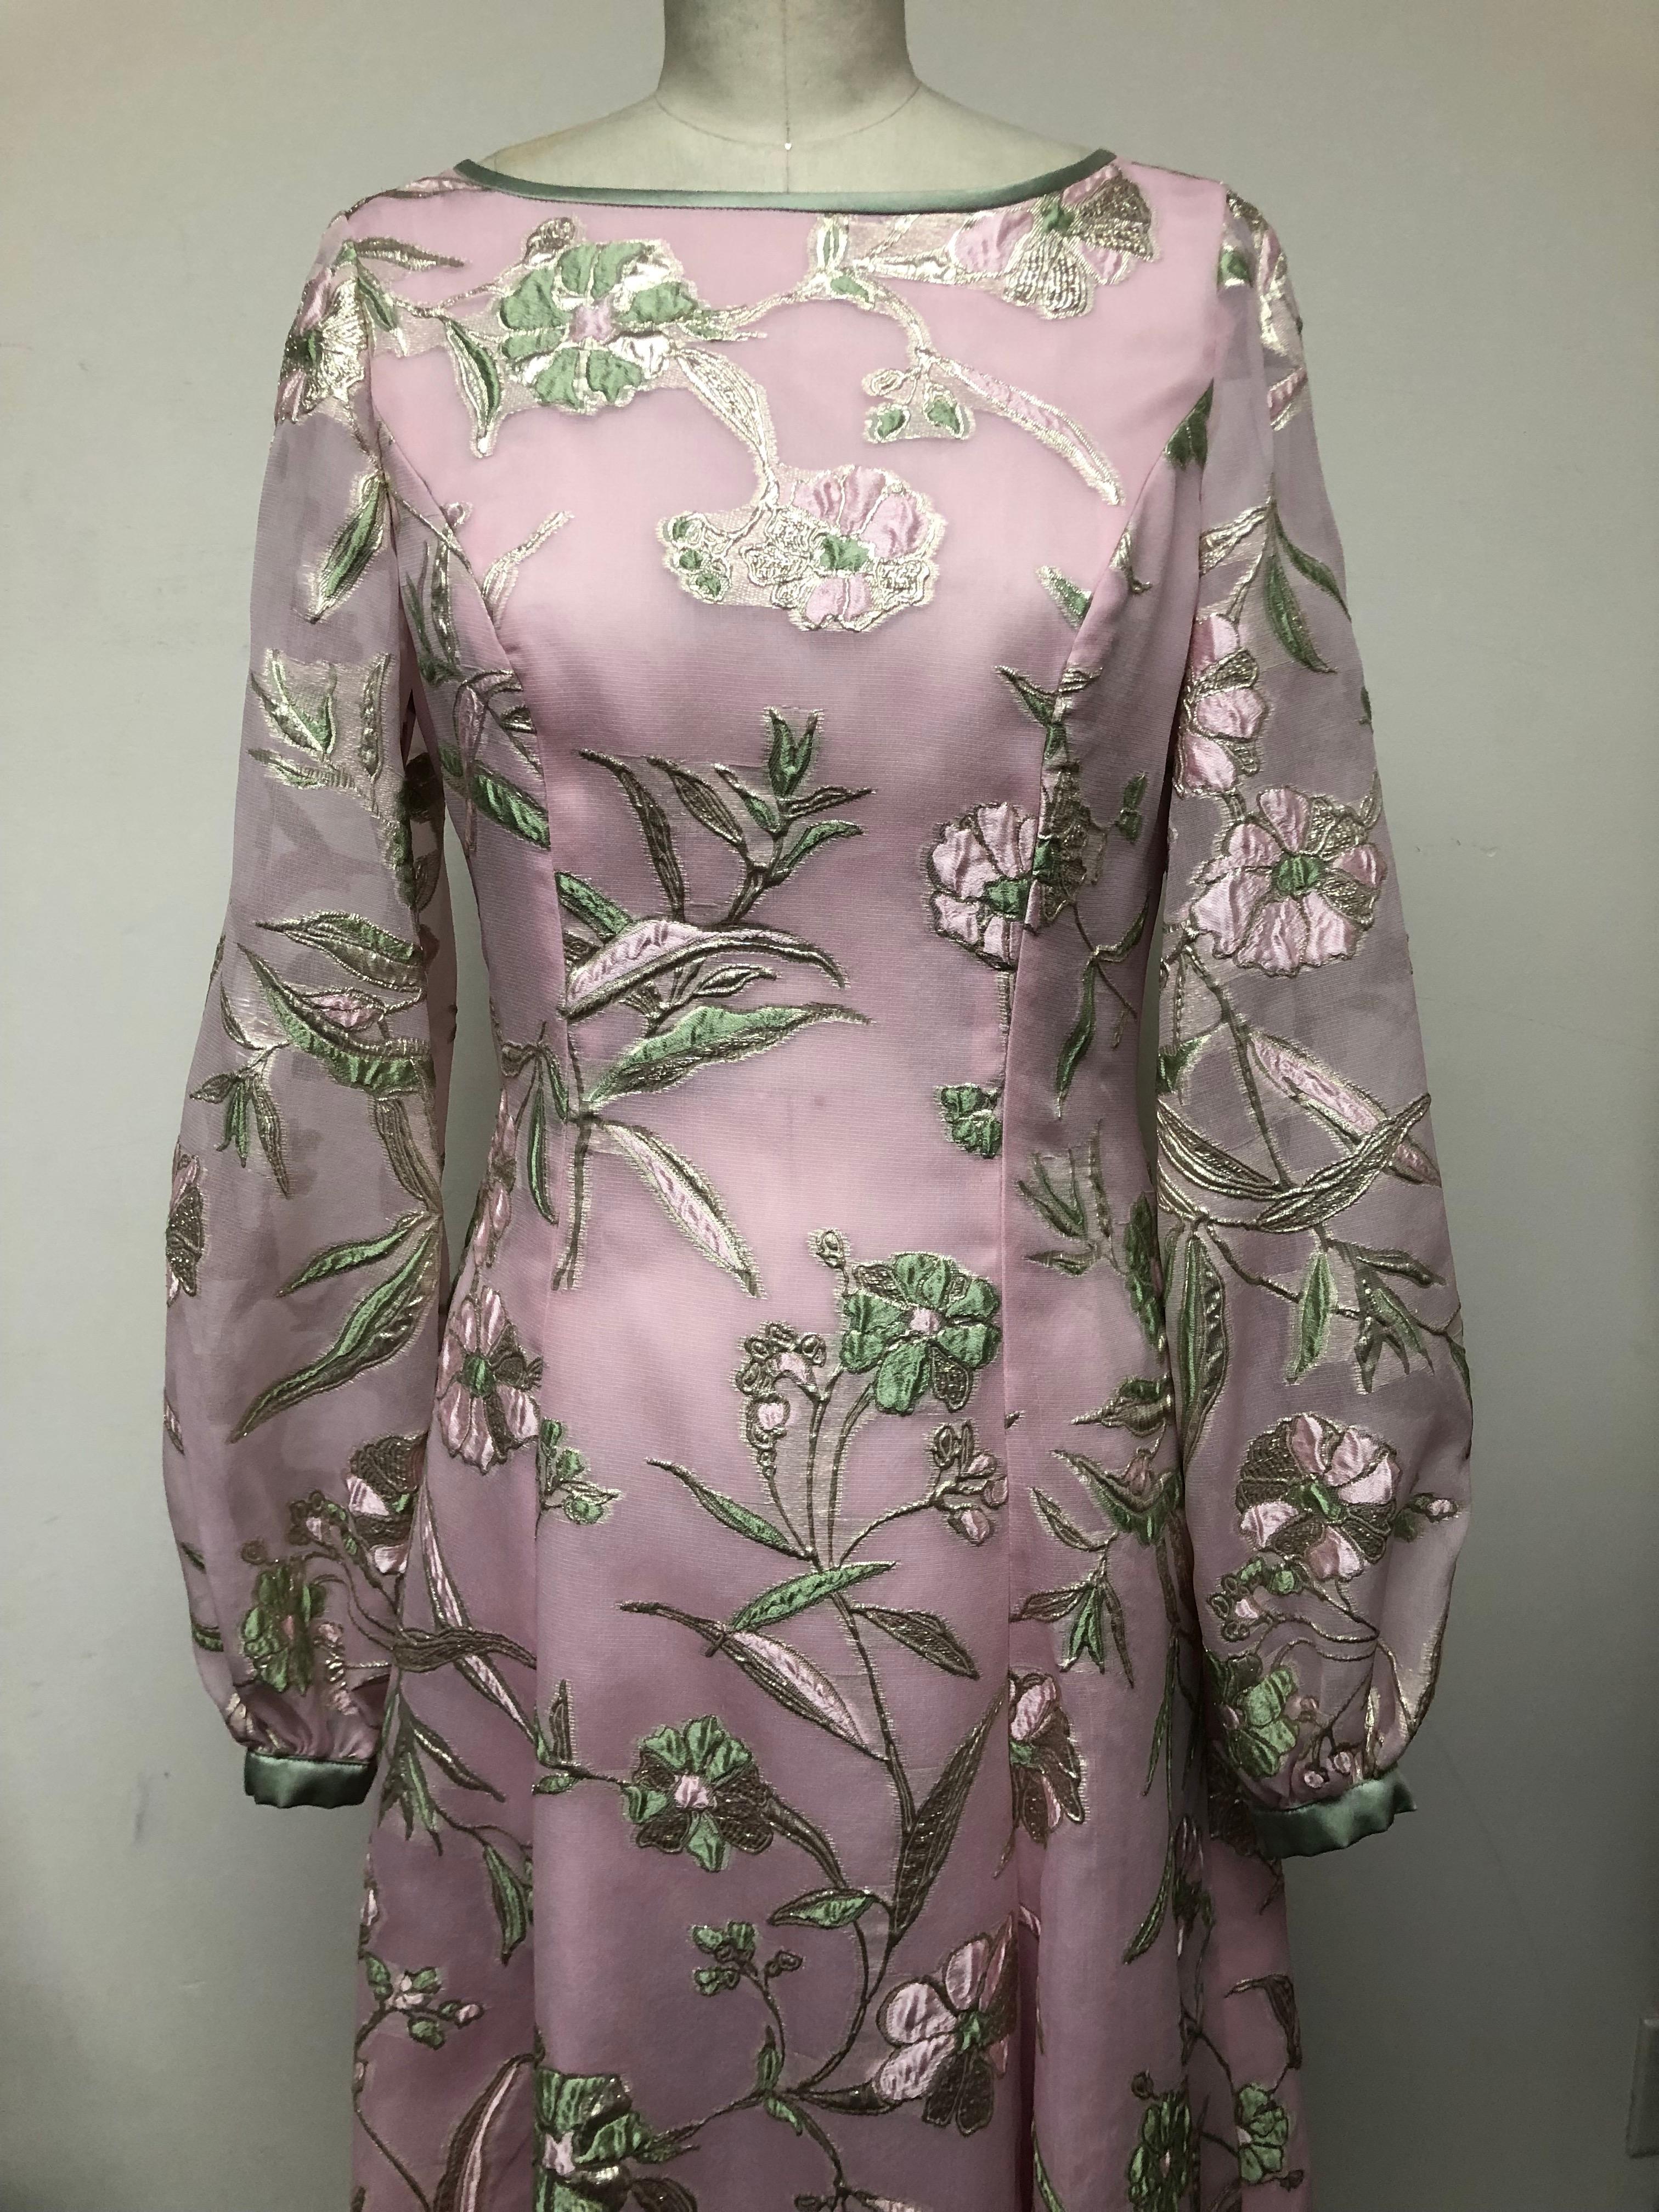 Timeless feel! Pink green and gold floral organza princess seamed gown, perfect for winter getaways to Palm Beach and Bahamas, and spring and summer garden parties. Allover machine floral embroidery adds a lovely texture to this loosely fitted,